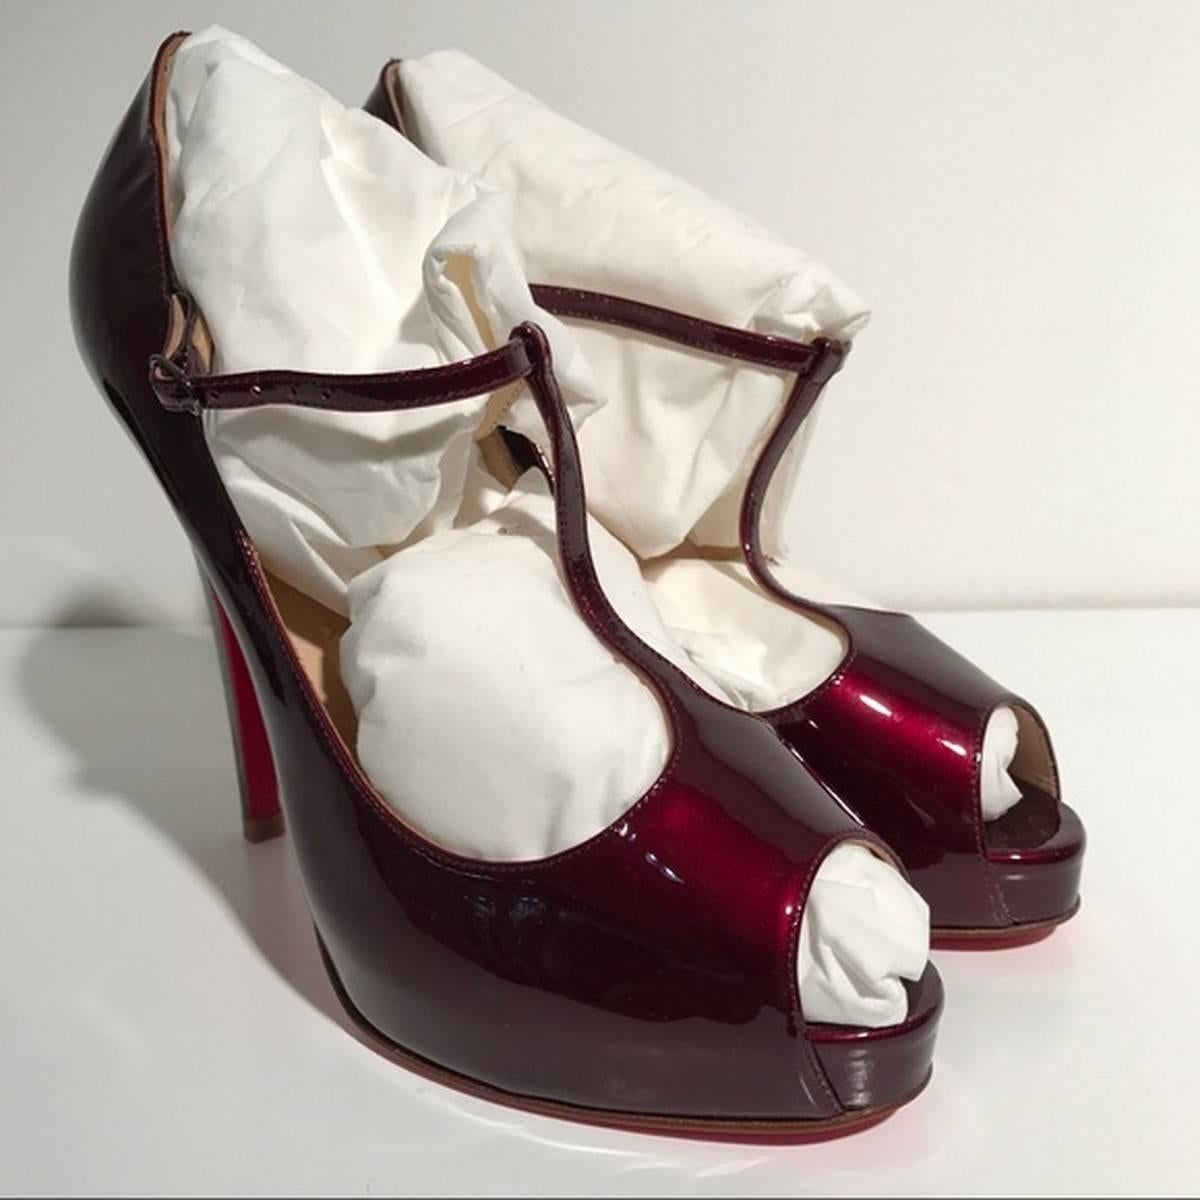 Christian Louboutin Patent Leather Peep Toe Heels (Size - 8) - 

Brand new with box. True to size. 38 European, 8 USA. Made in Italy.